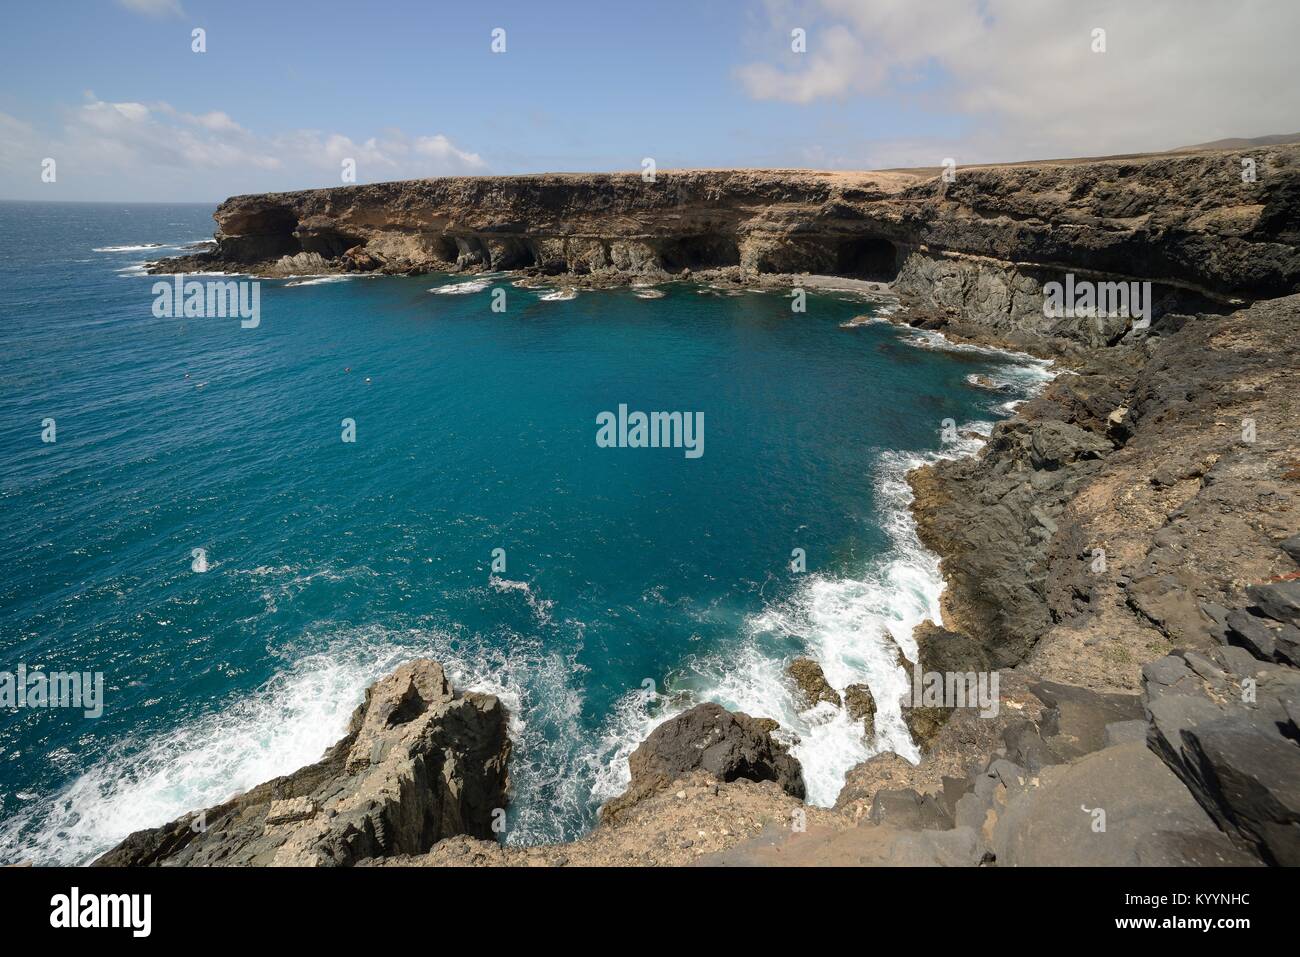 Overview of the Black Cove / Caleta Negra surrounded by eroded volcanic rock cliffs, Natural Monument of Ajuy (Peurto de la Pena), Fuerteventura. Stock Photo